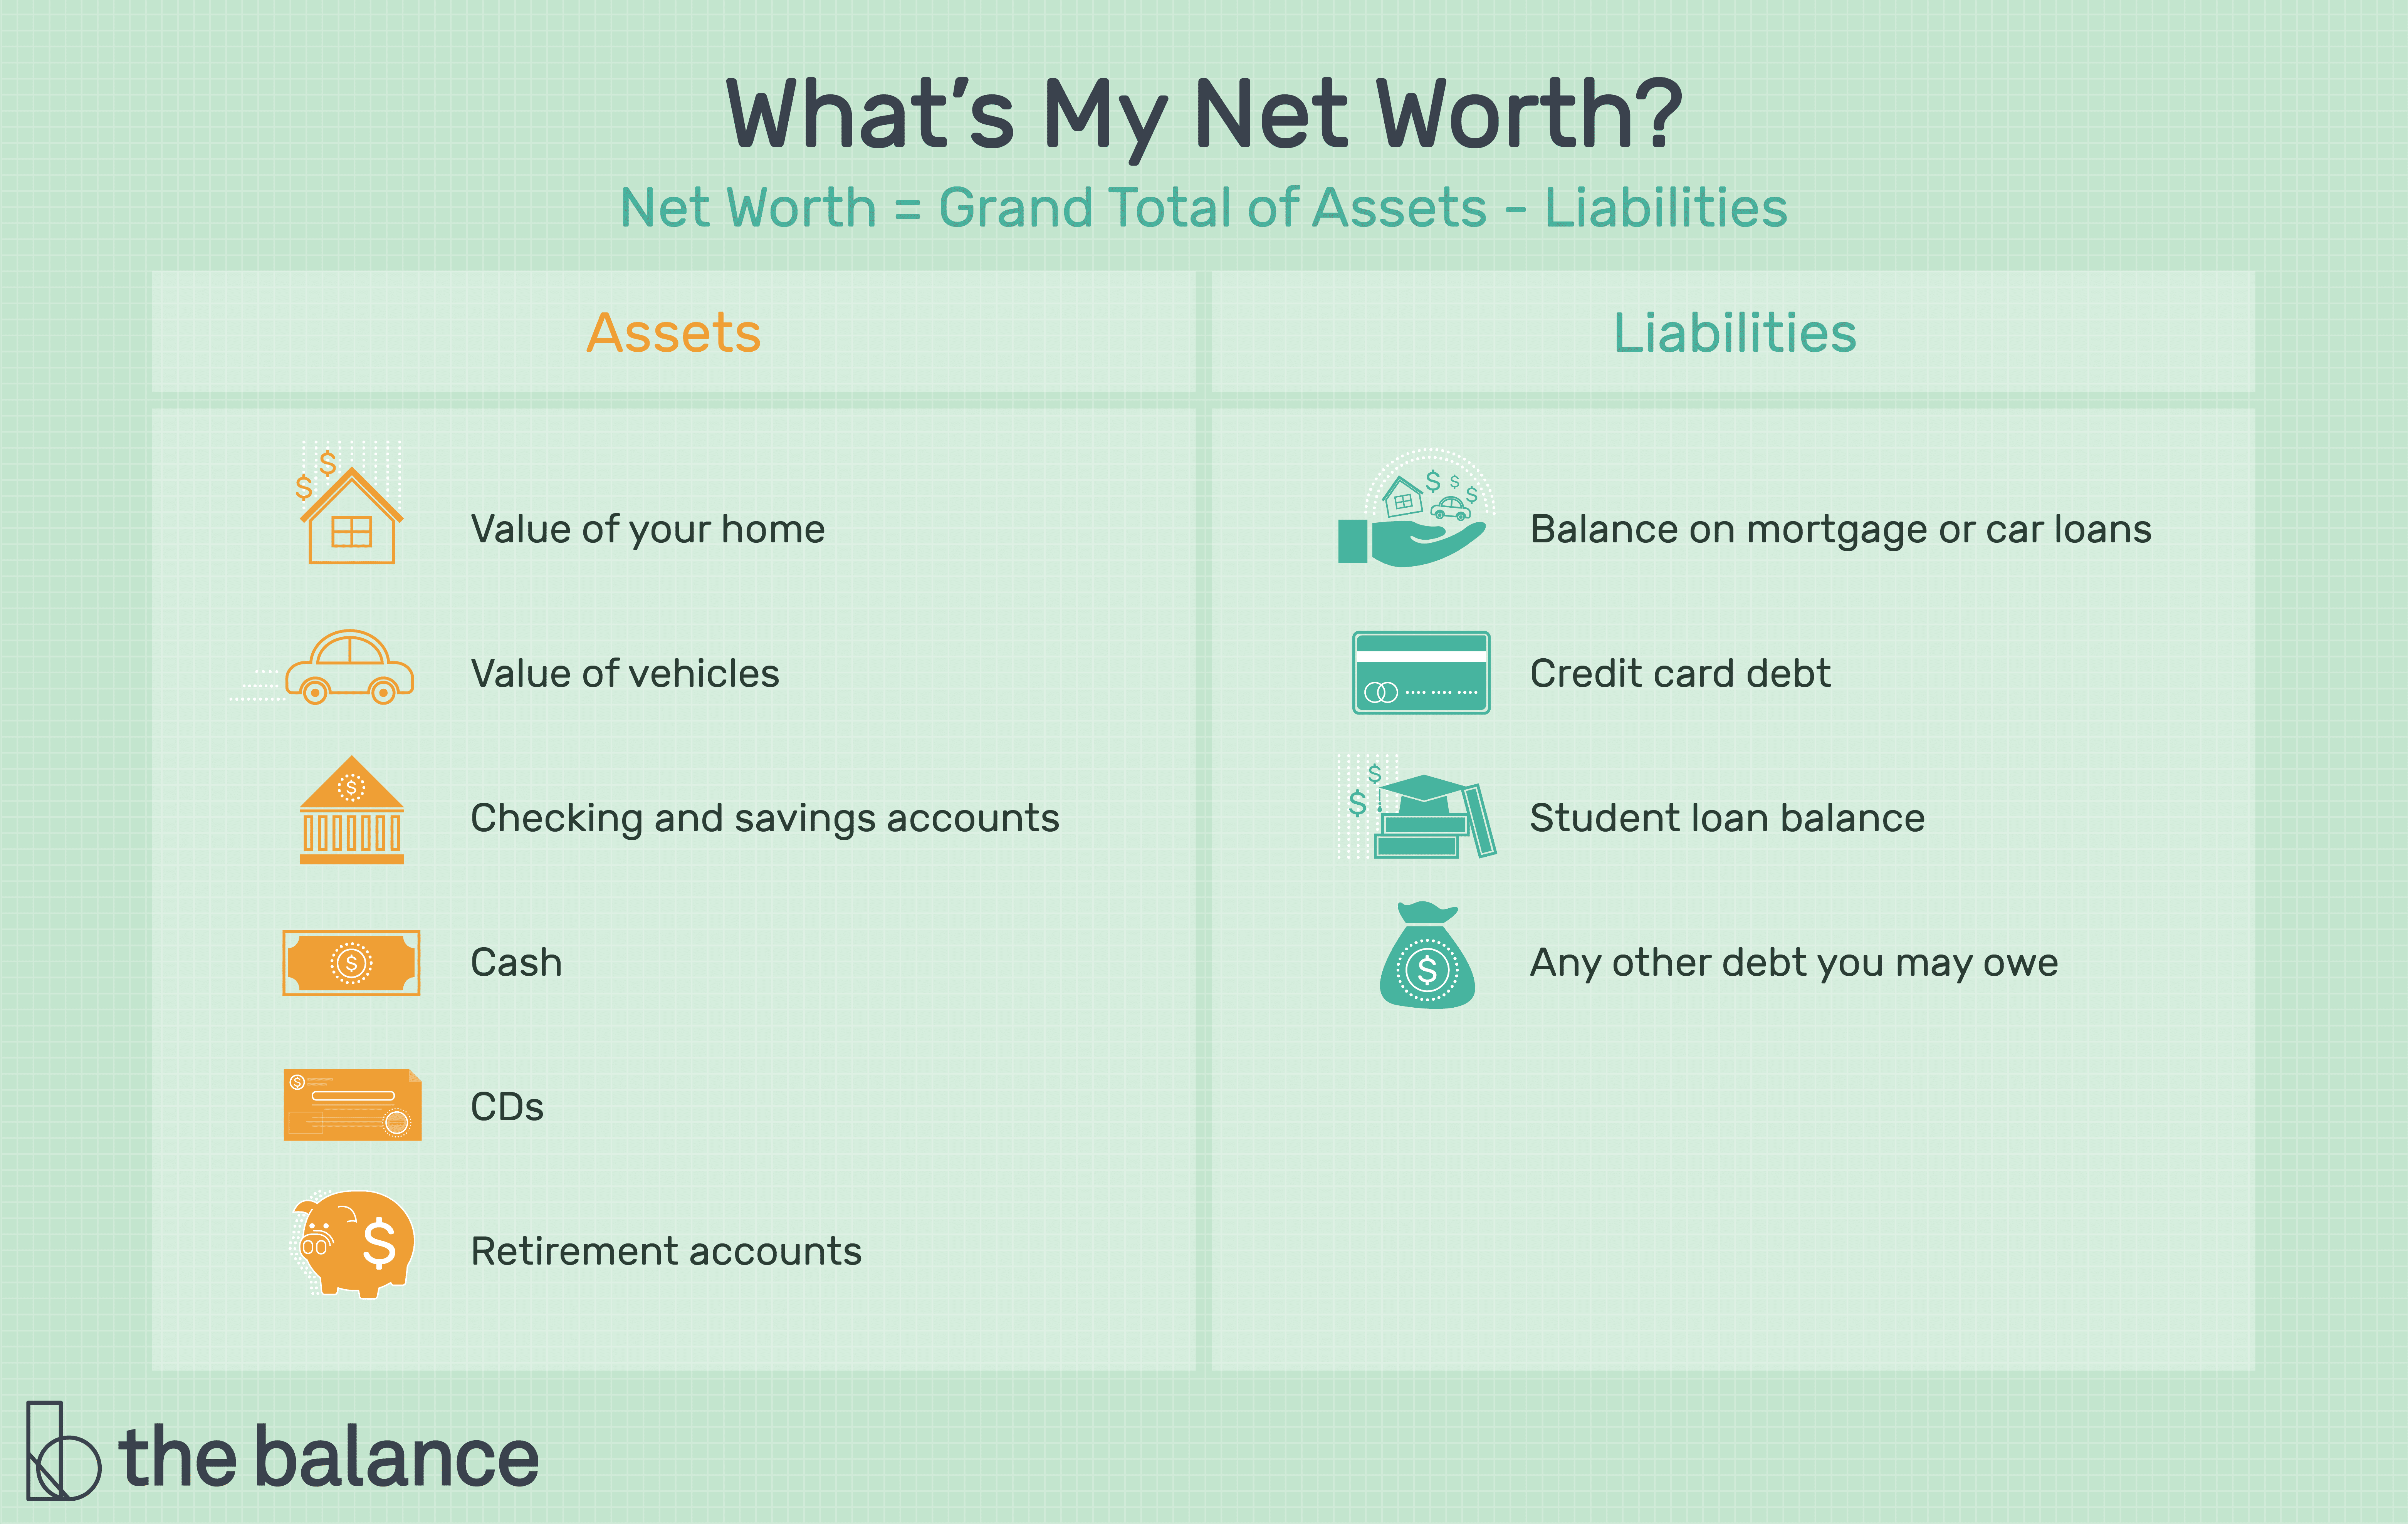 What is Magic's net worth?